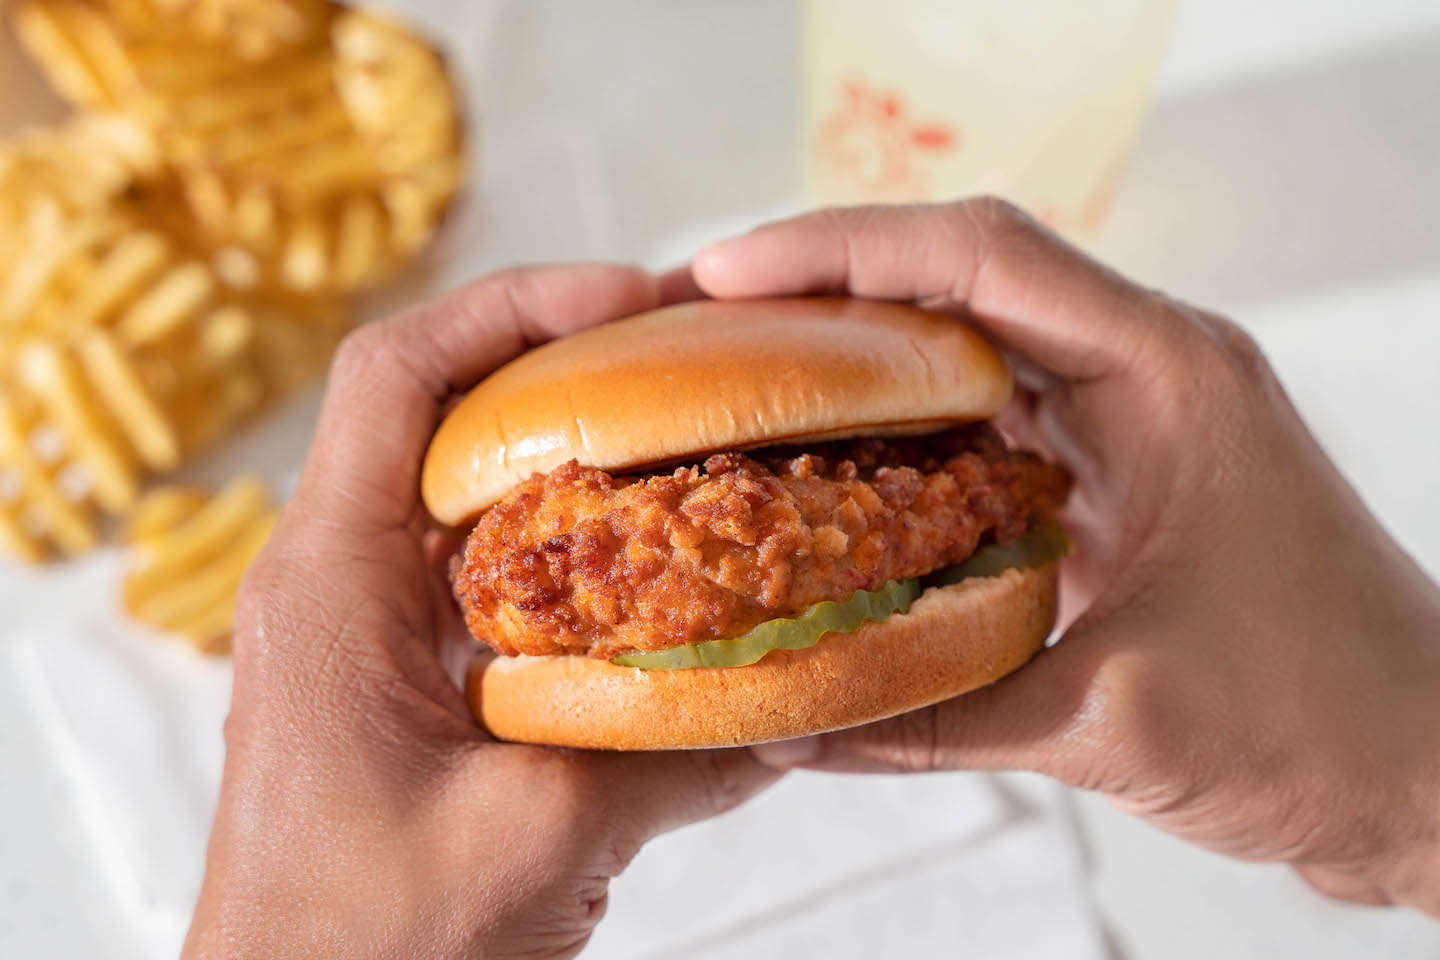 Person holding Chick-fil-A® Chicken Sandwich with Waffle Potato Fries® and Chick-fil-A® Lemonade in the background